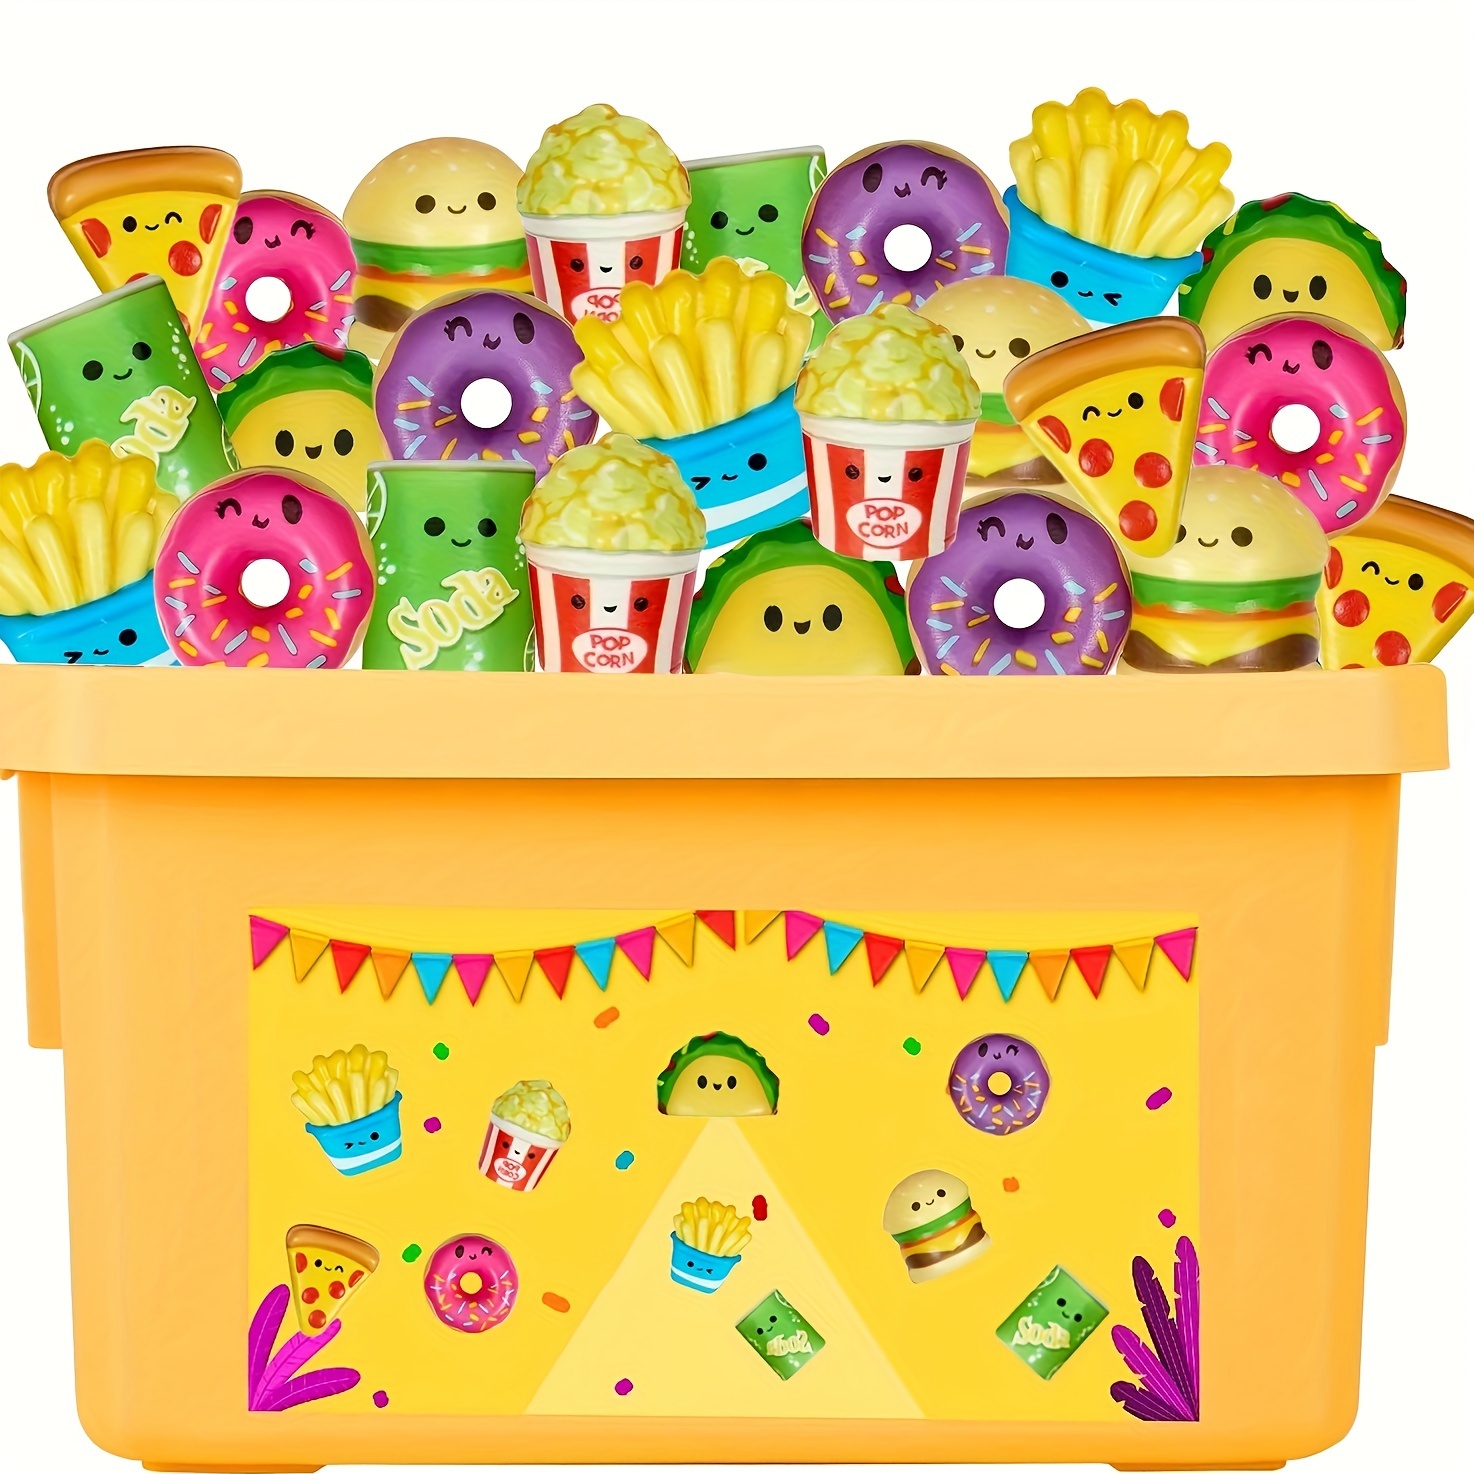 

24-piece Squishy Toy Set - Slow Rising Foam Fidgets, Ideal For Classroom Prizes & Party Favors, Suitable For All Ages